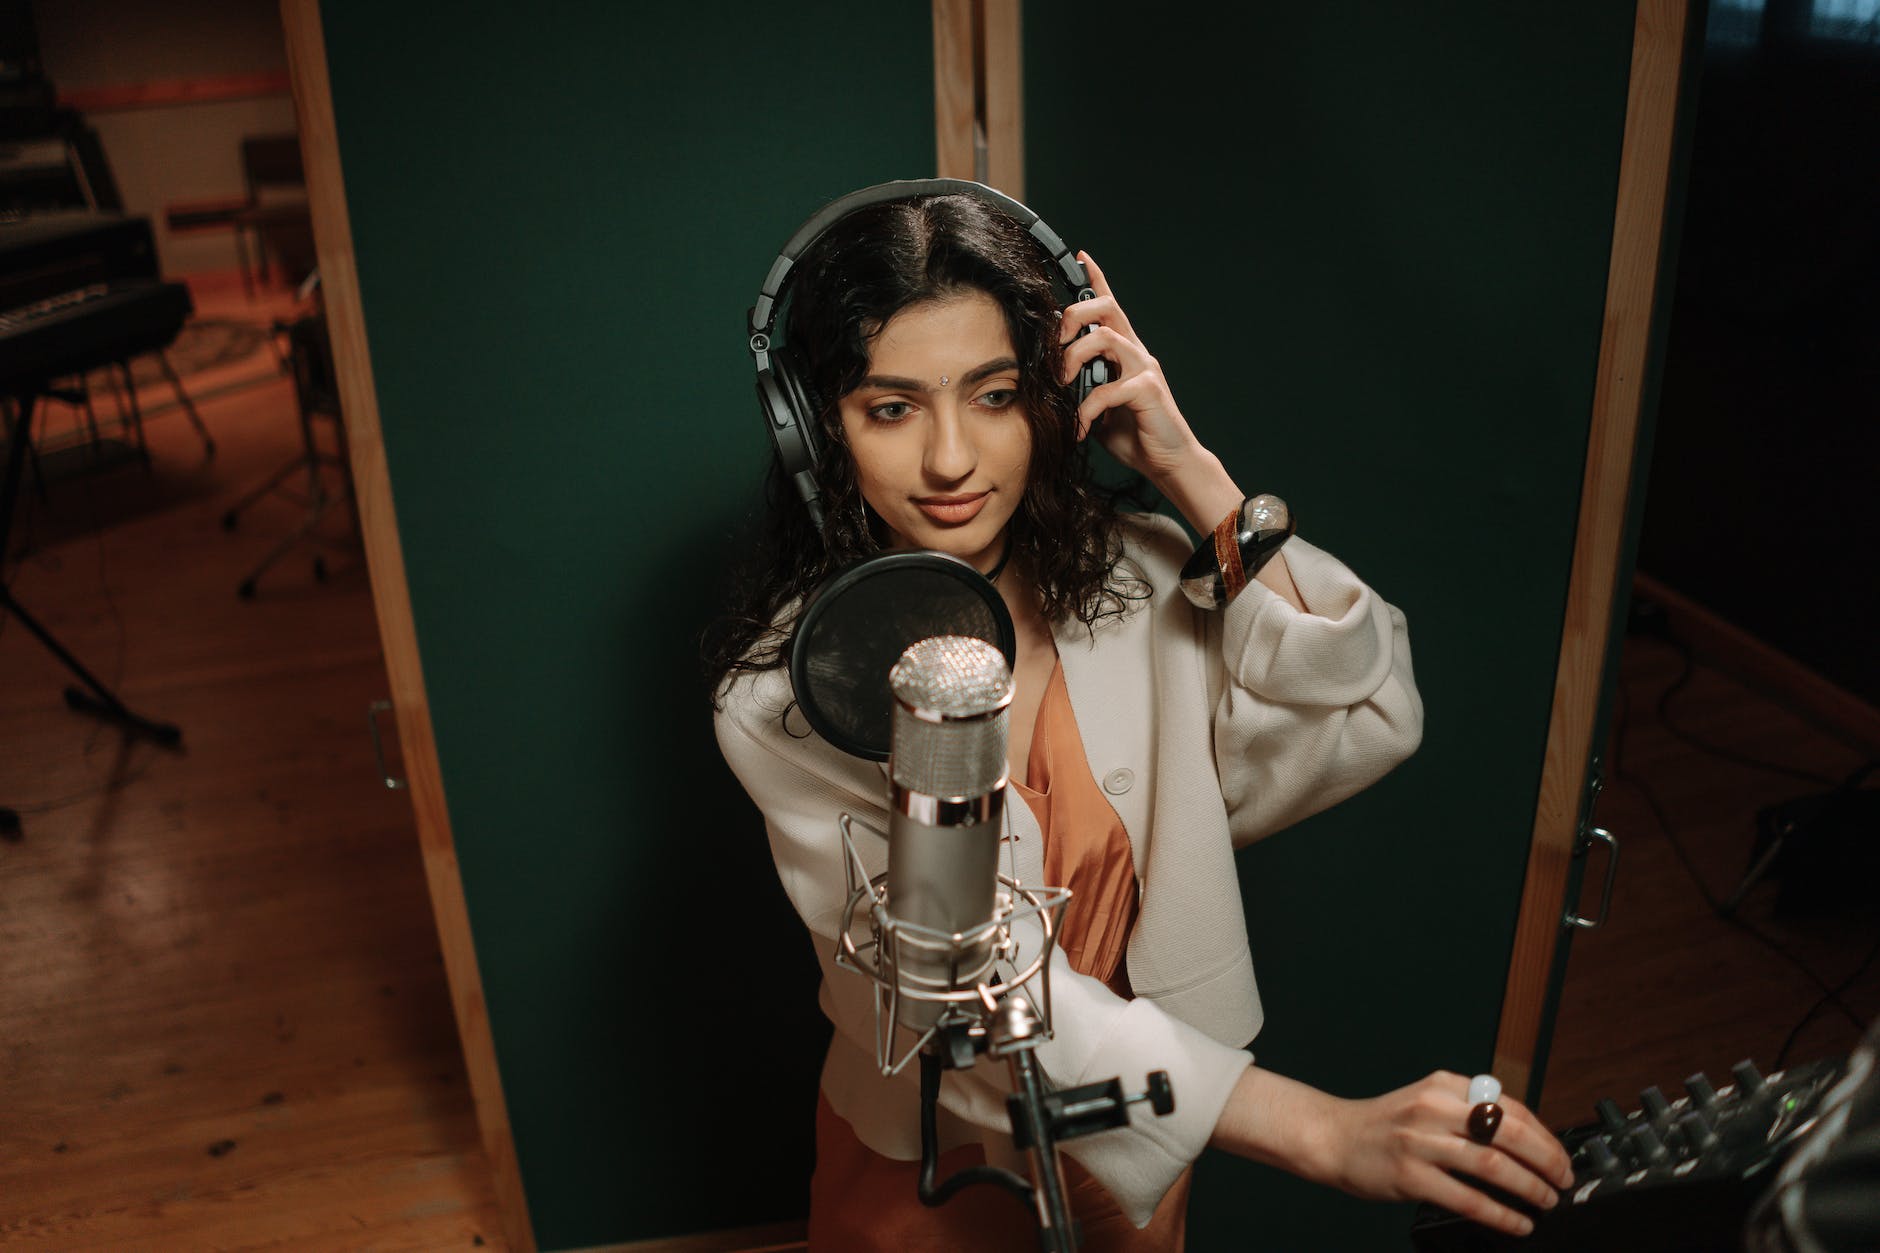 a female artist recording a song